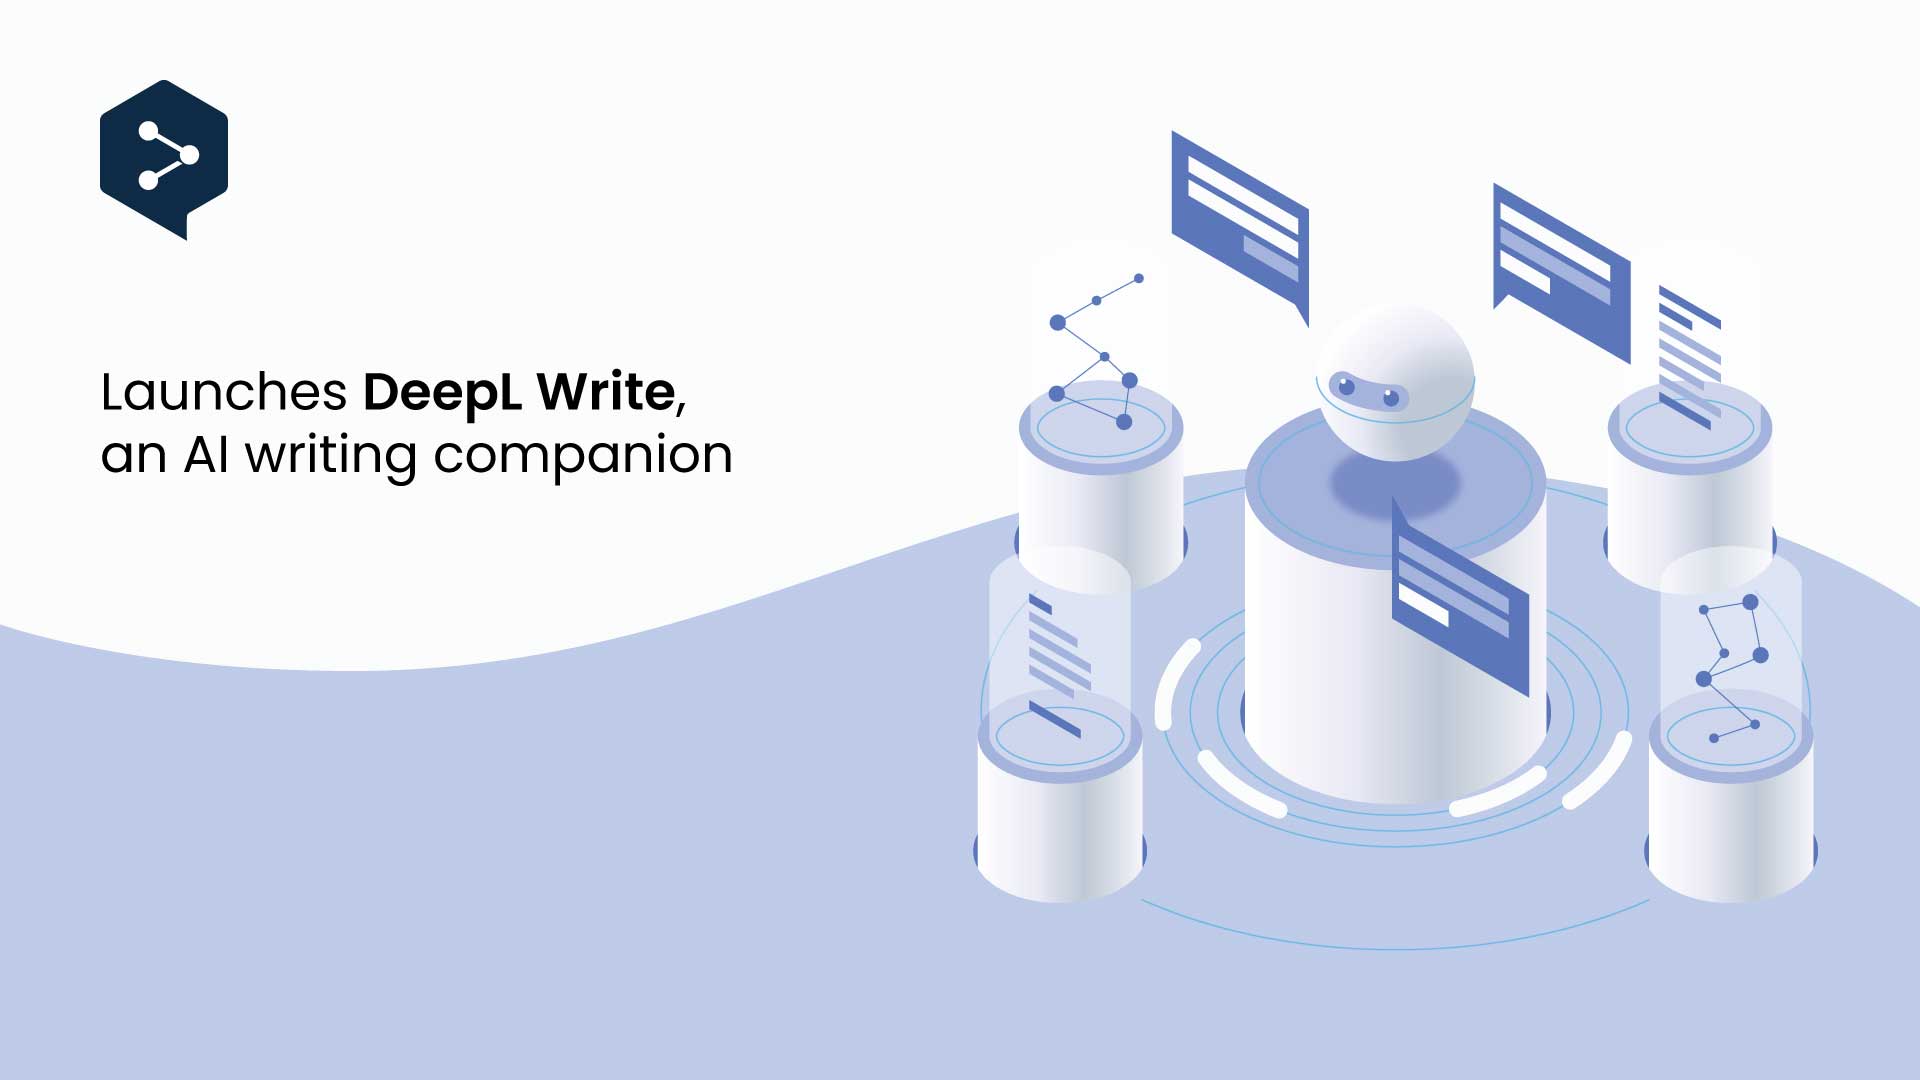  DeepL, one of the world’s leading AI communication companies, launches DeepL Write